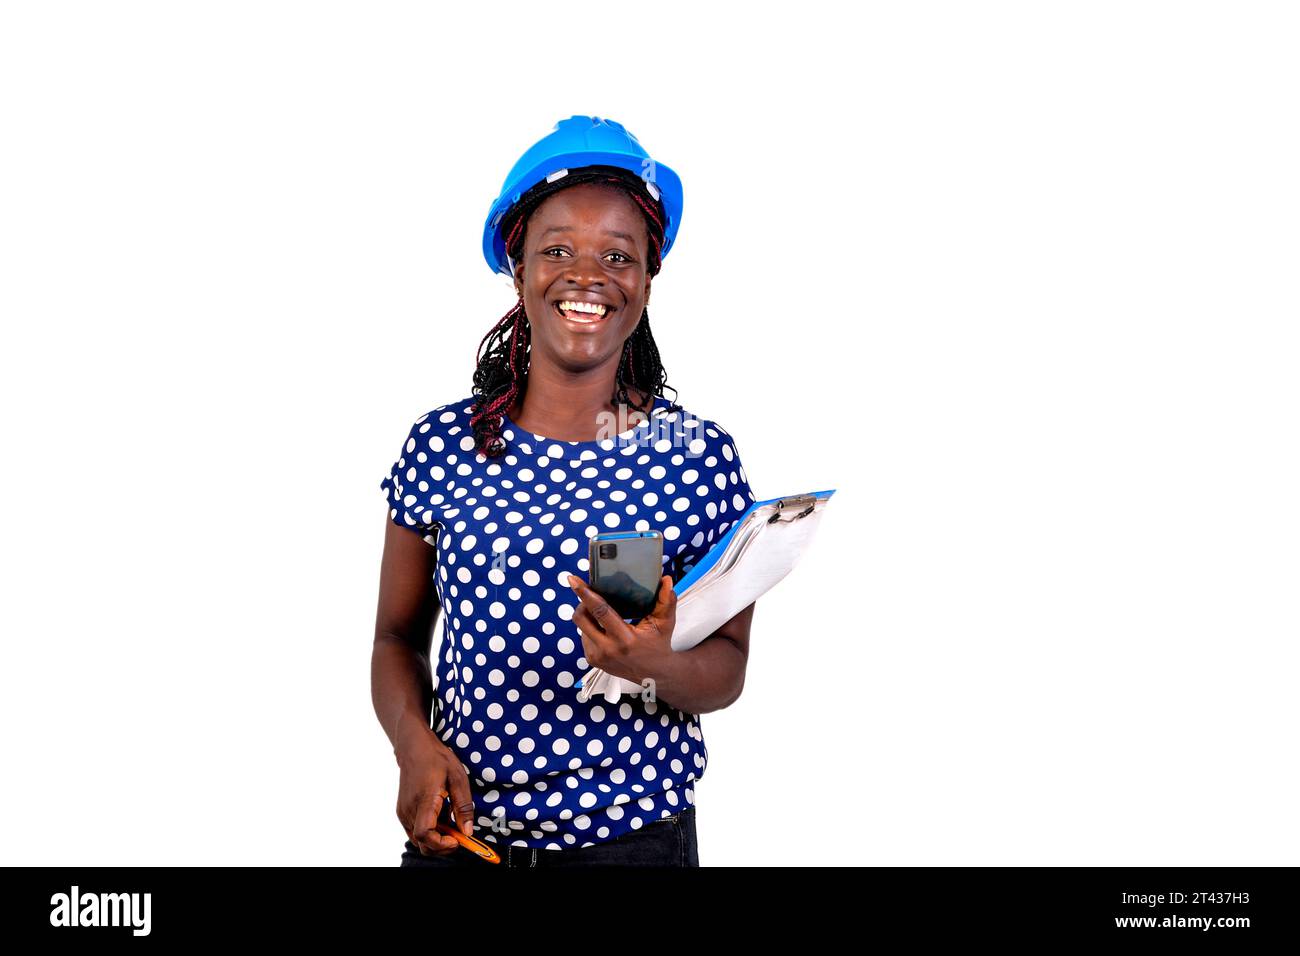 beautiful young female construction engineer holding mobile phone and clipboard while smiling. Stock Photo